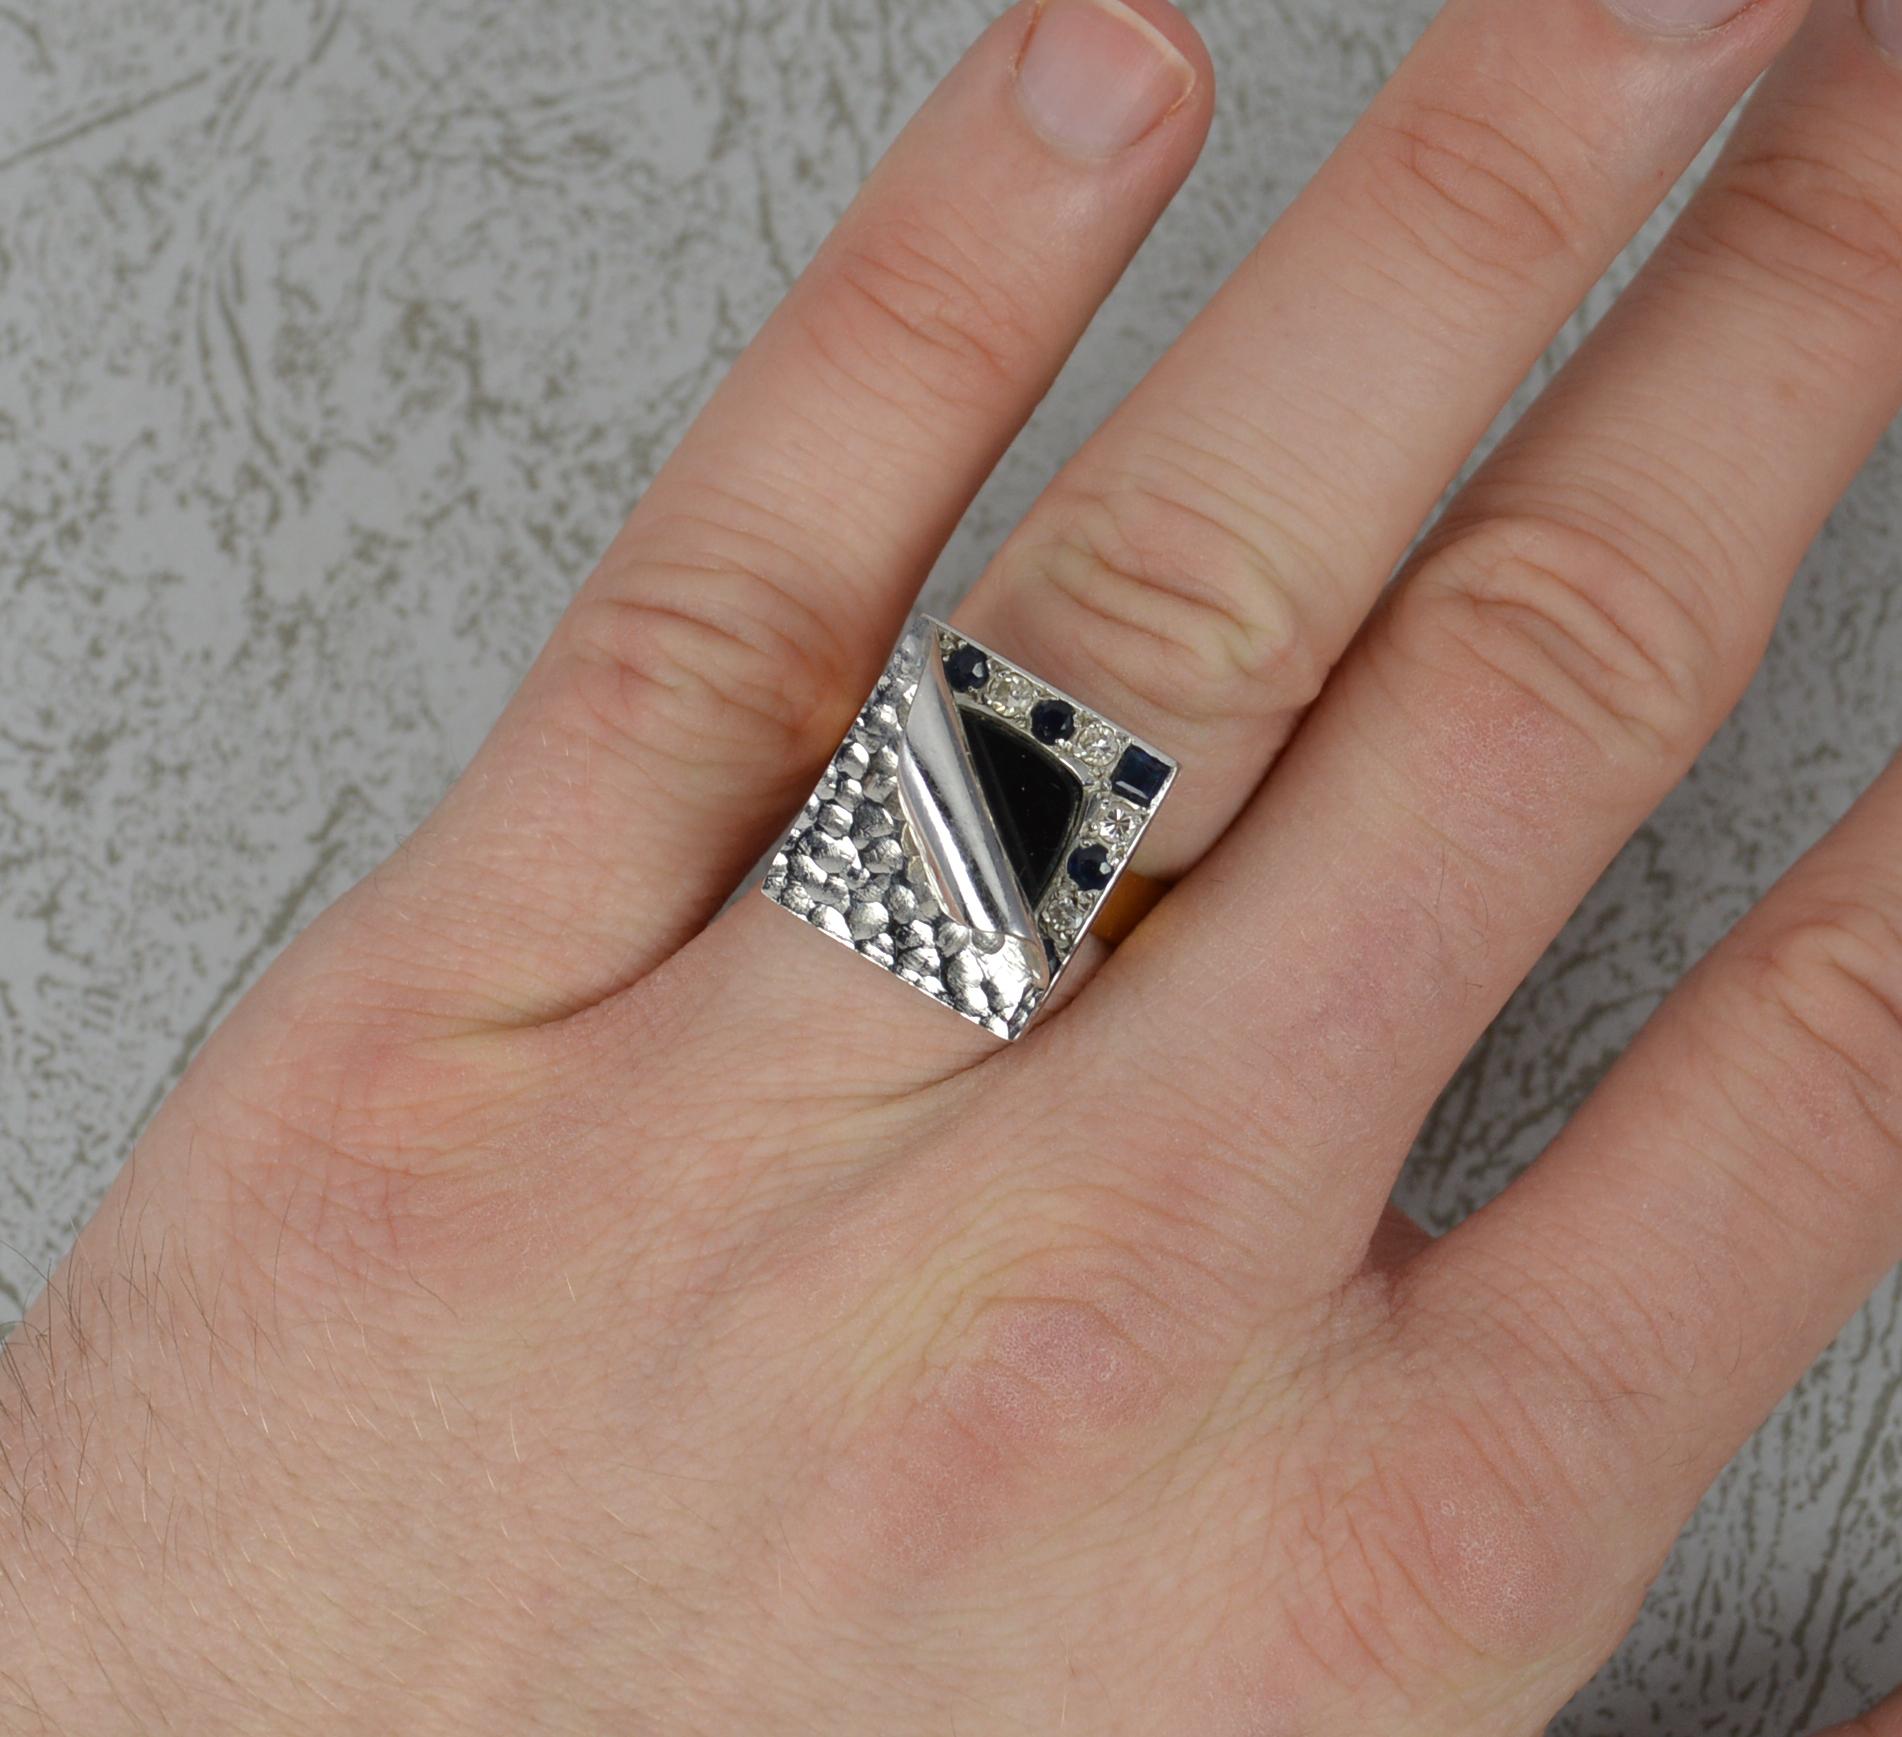 A stunning unique handmade ring.
Solid 18 carat yellow gold shank and white gold head.
Designed with a triangular geometric shaped band. 
The head to measure 15mm x 17mm approx. It features a hammered front design which appears to be peeling back to